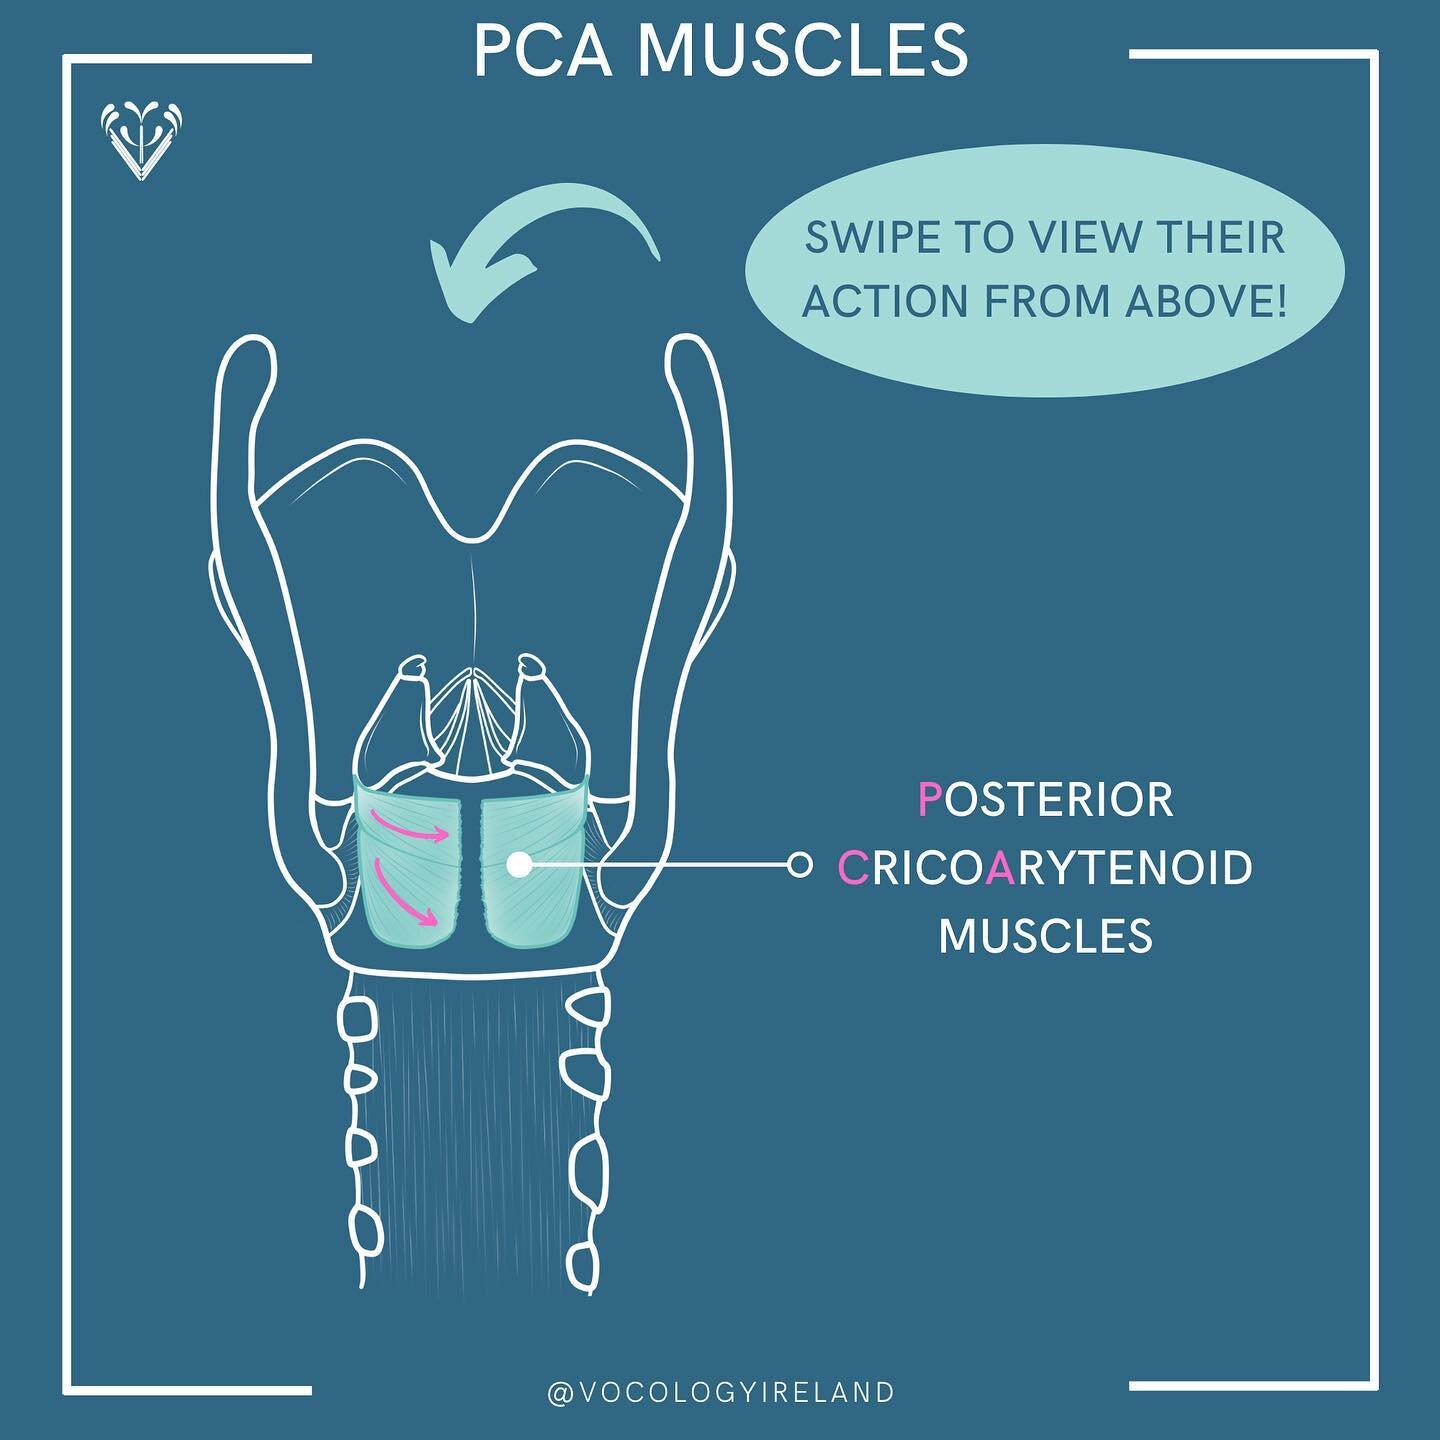 #AnatoMonday: PCA muscles in action!

CRICO 👉 ARYTENOID

Remember that usually when we engage muscles they move from their point of insertion toward their point of origin 🤓

So HERE that means that the PCA muscles will pull that part of the aryteno